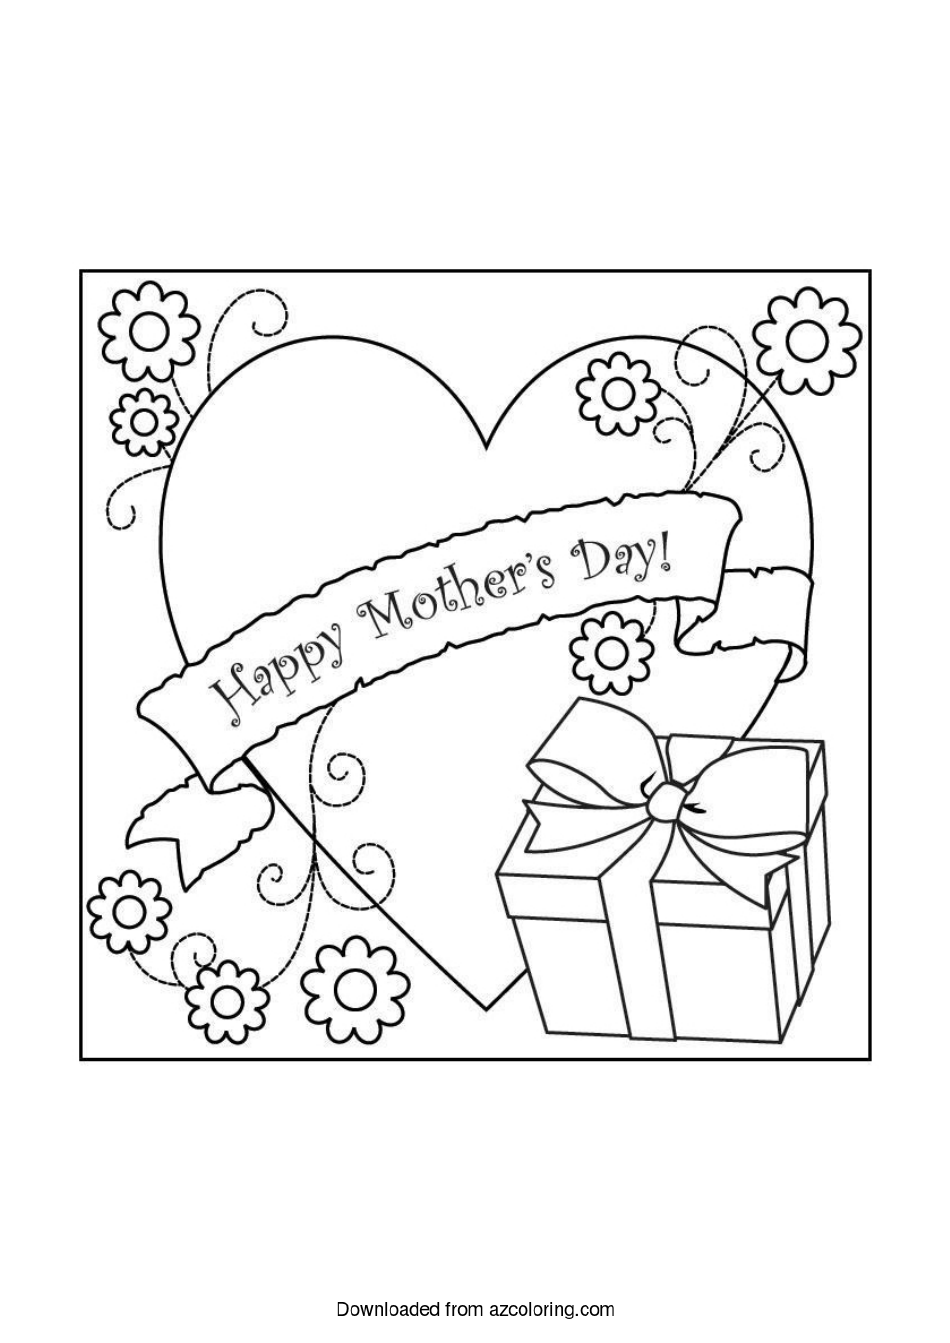 Happy Mother's Day Coloring Sheet